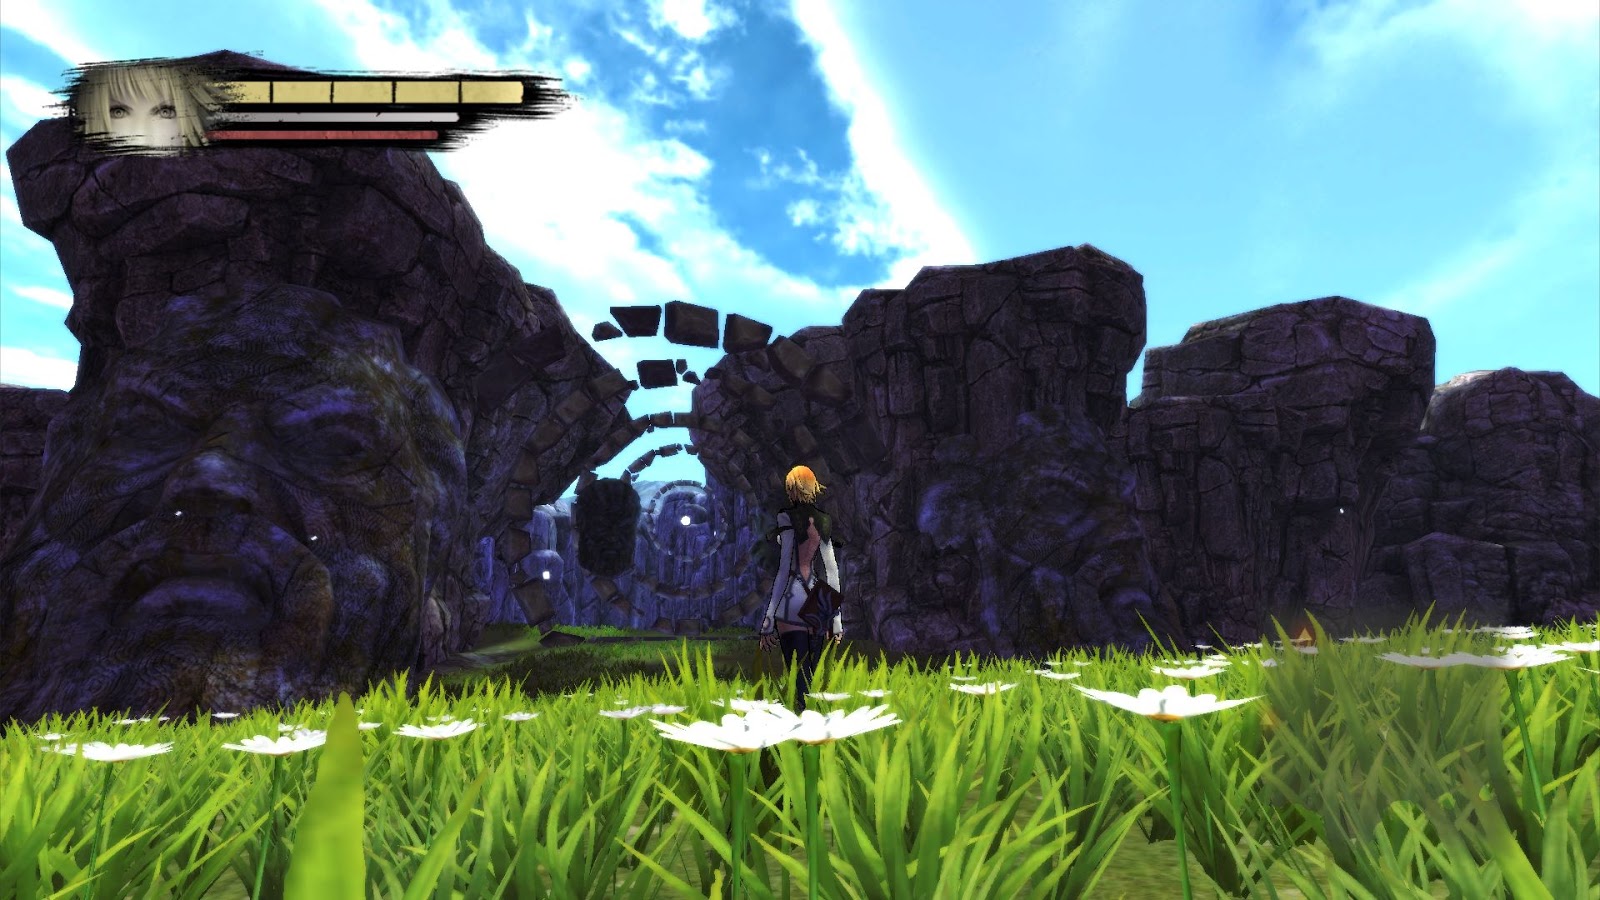 Download Anima Gate of Memories for PC